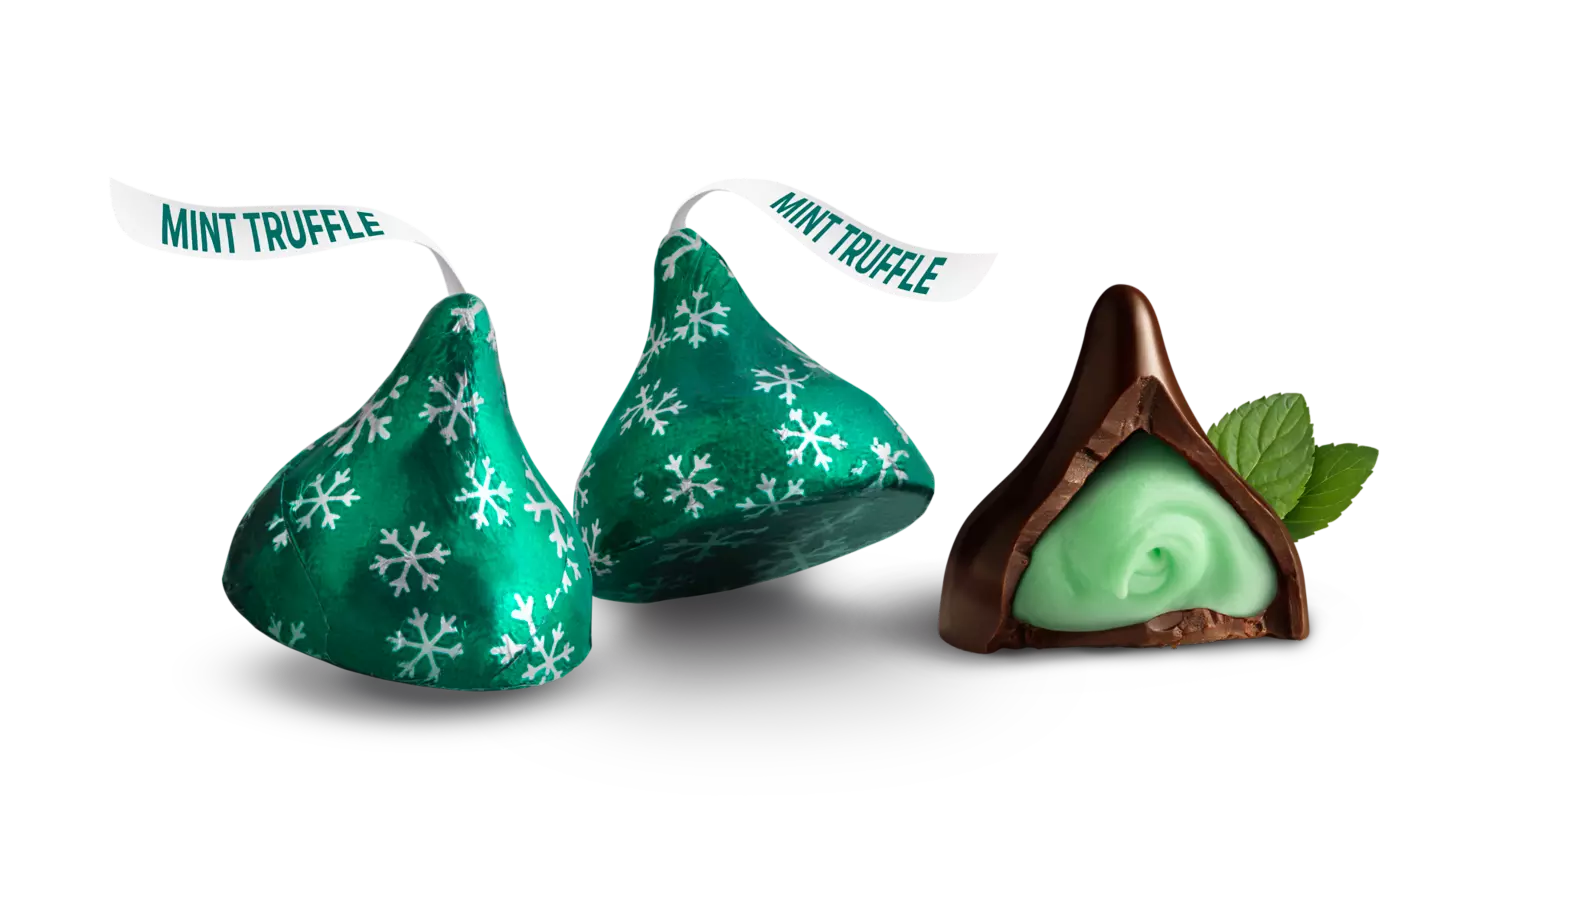 HERSHEY'S KISSES Mint Truffle Candy, 7 oz bag - Out of Package